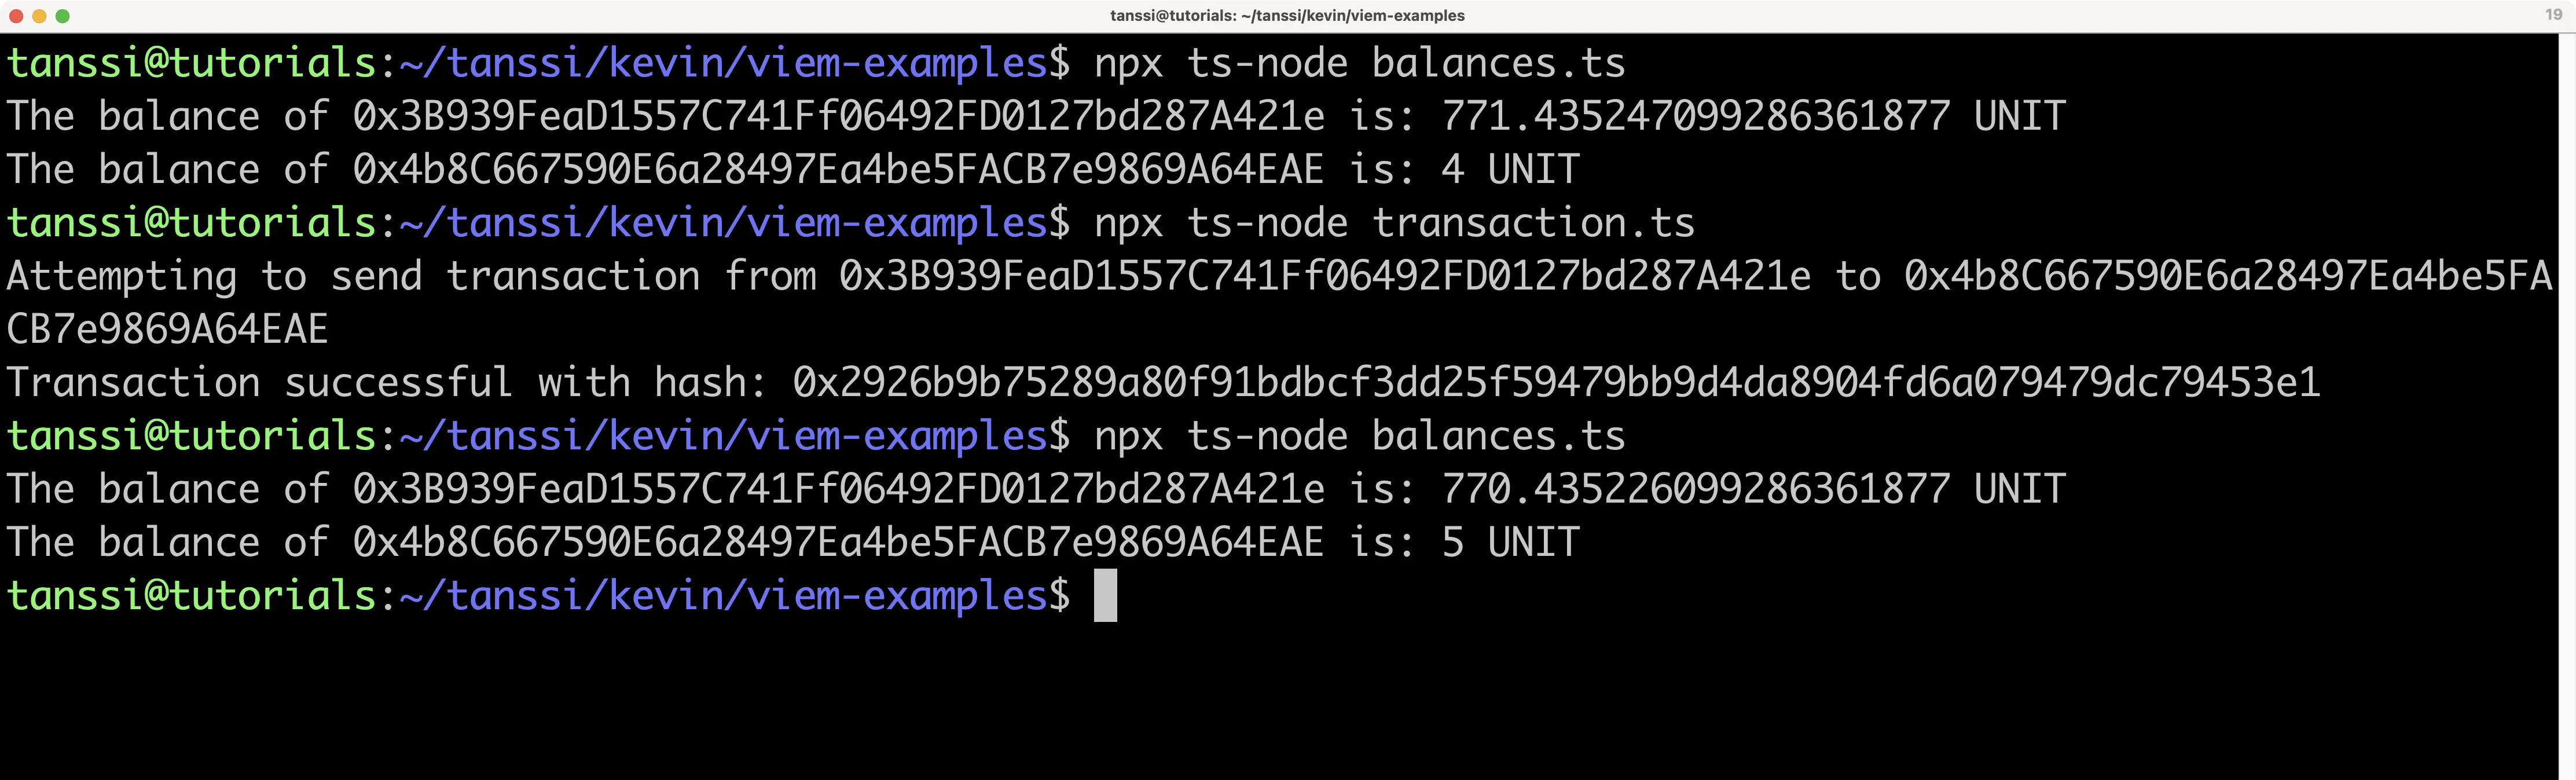 The result of running the transaction and balances scripts in the terminal